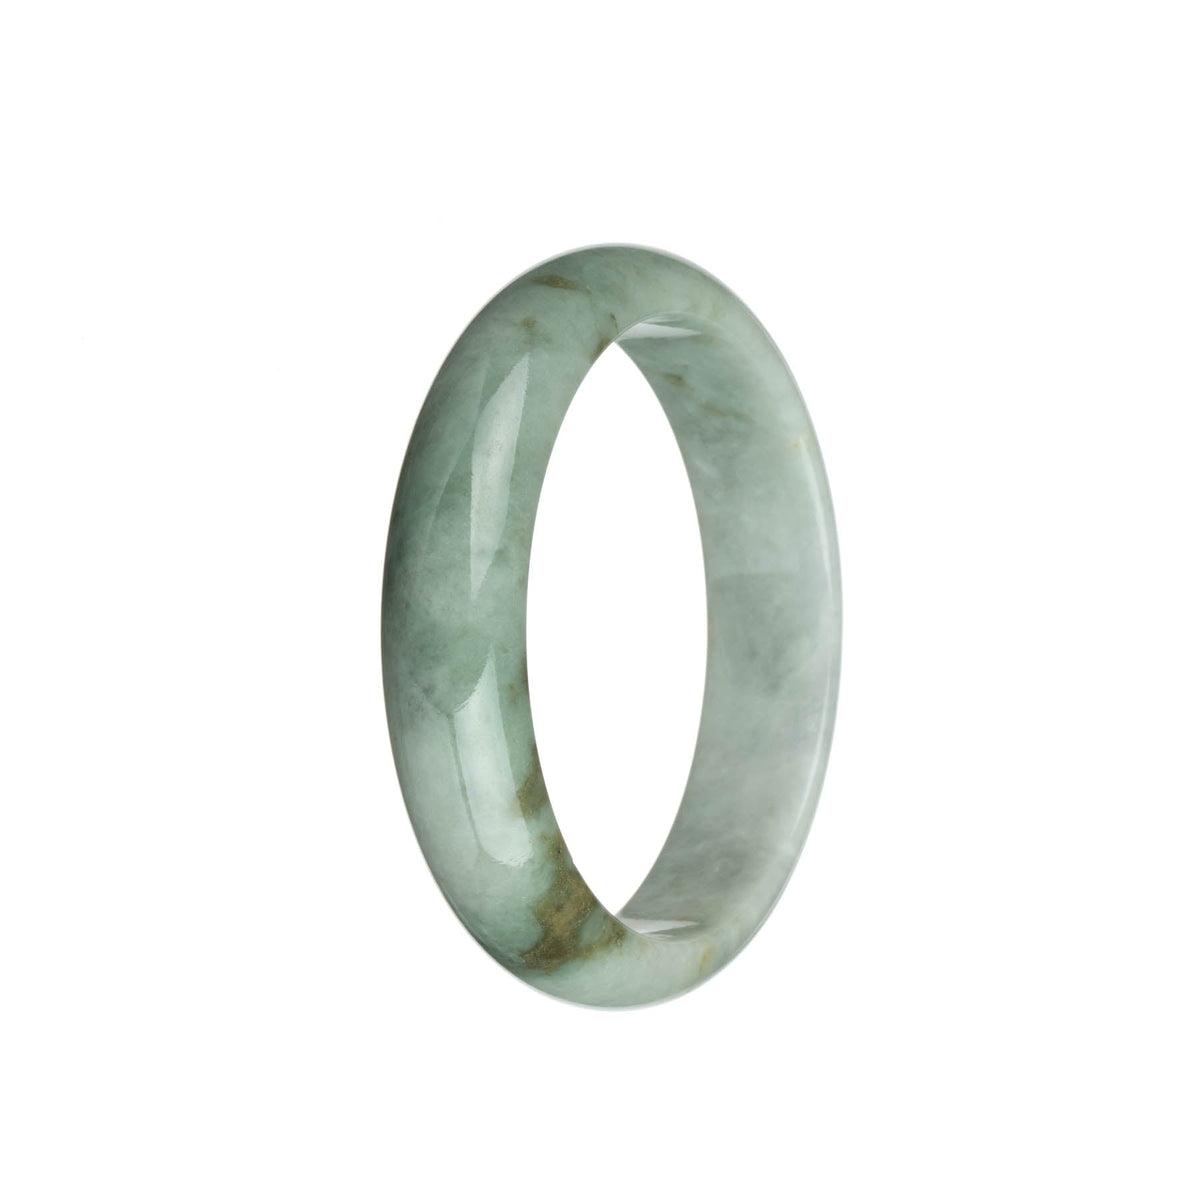 A traditional jade bangle bracelet, predominantly light grey and light green in color, with brown patterns. The bracelet is in a traditional style, with a half moon shape and a smooth polished surface.